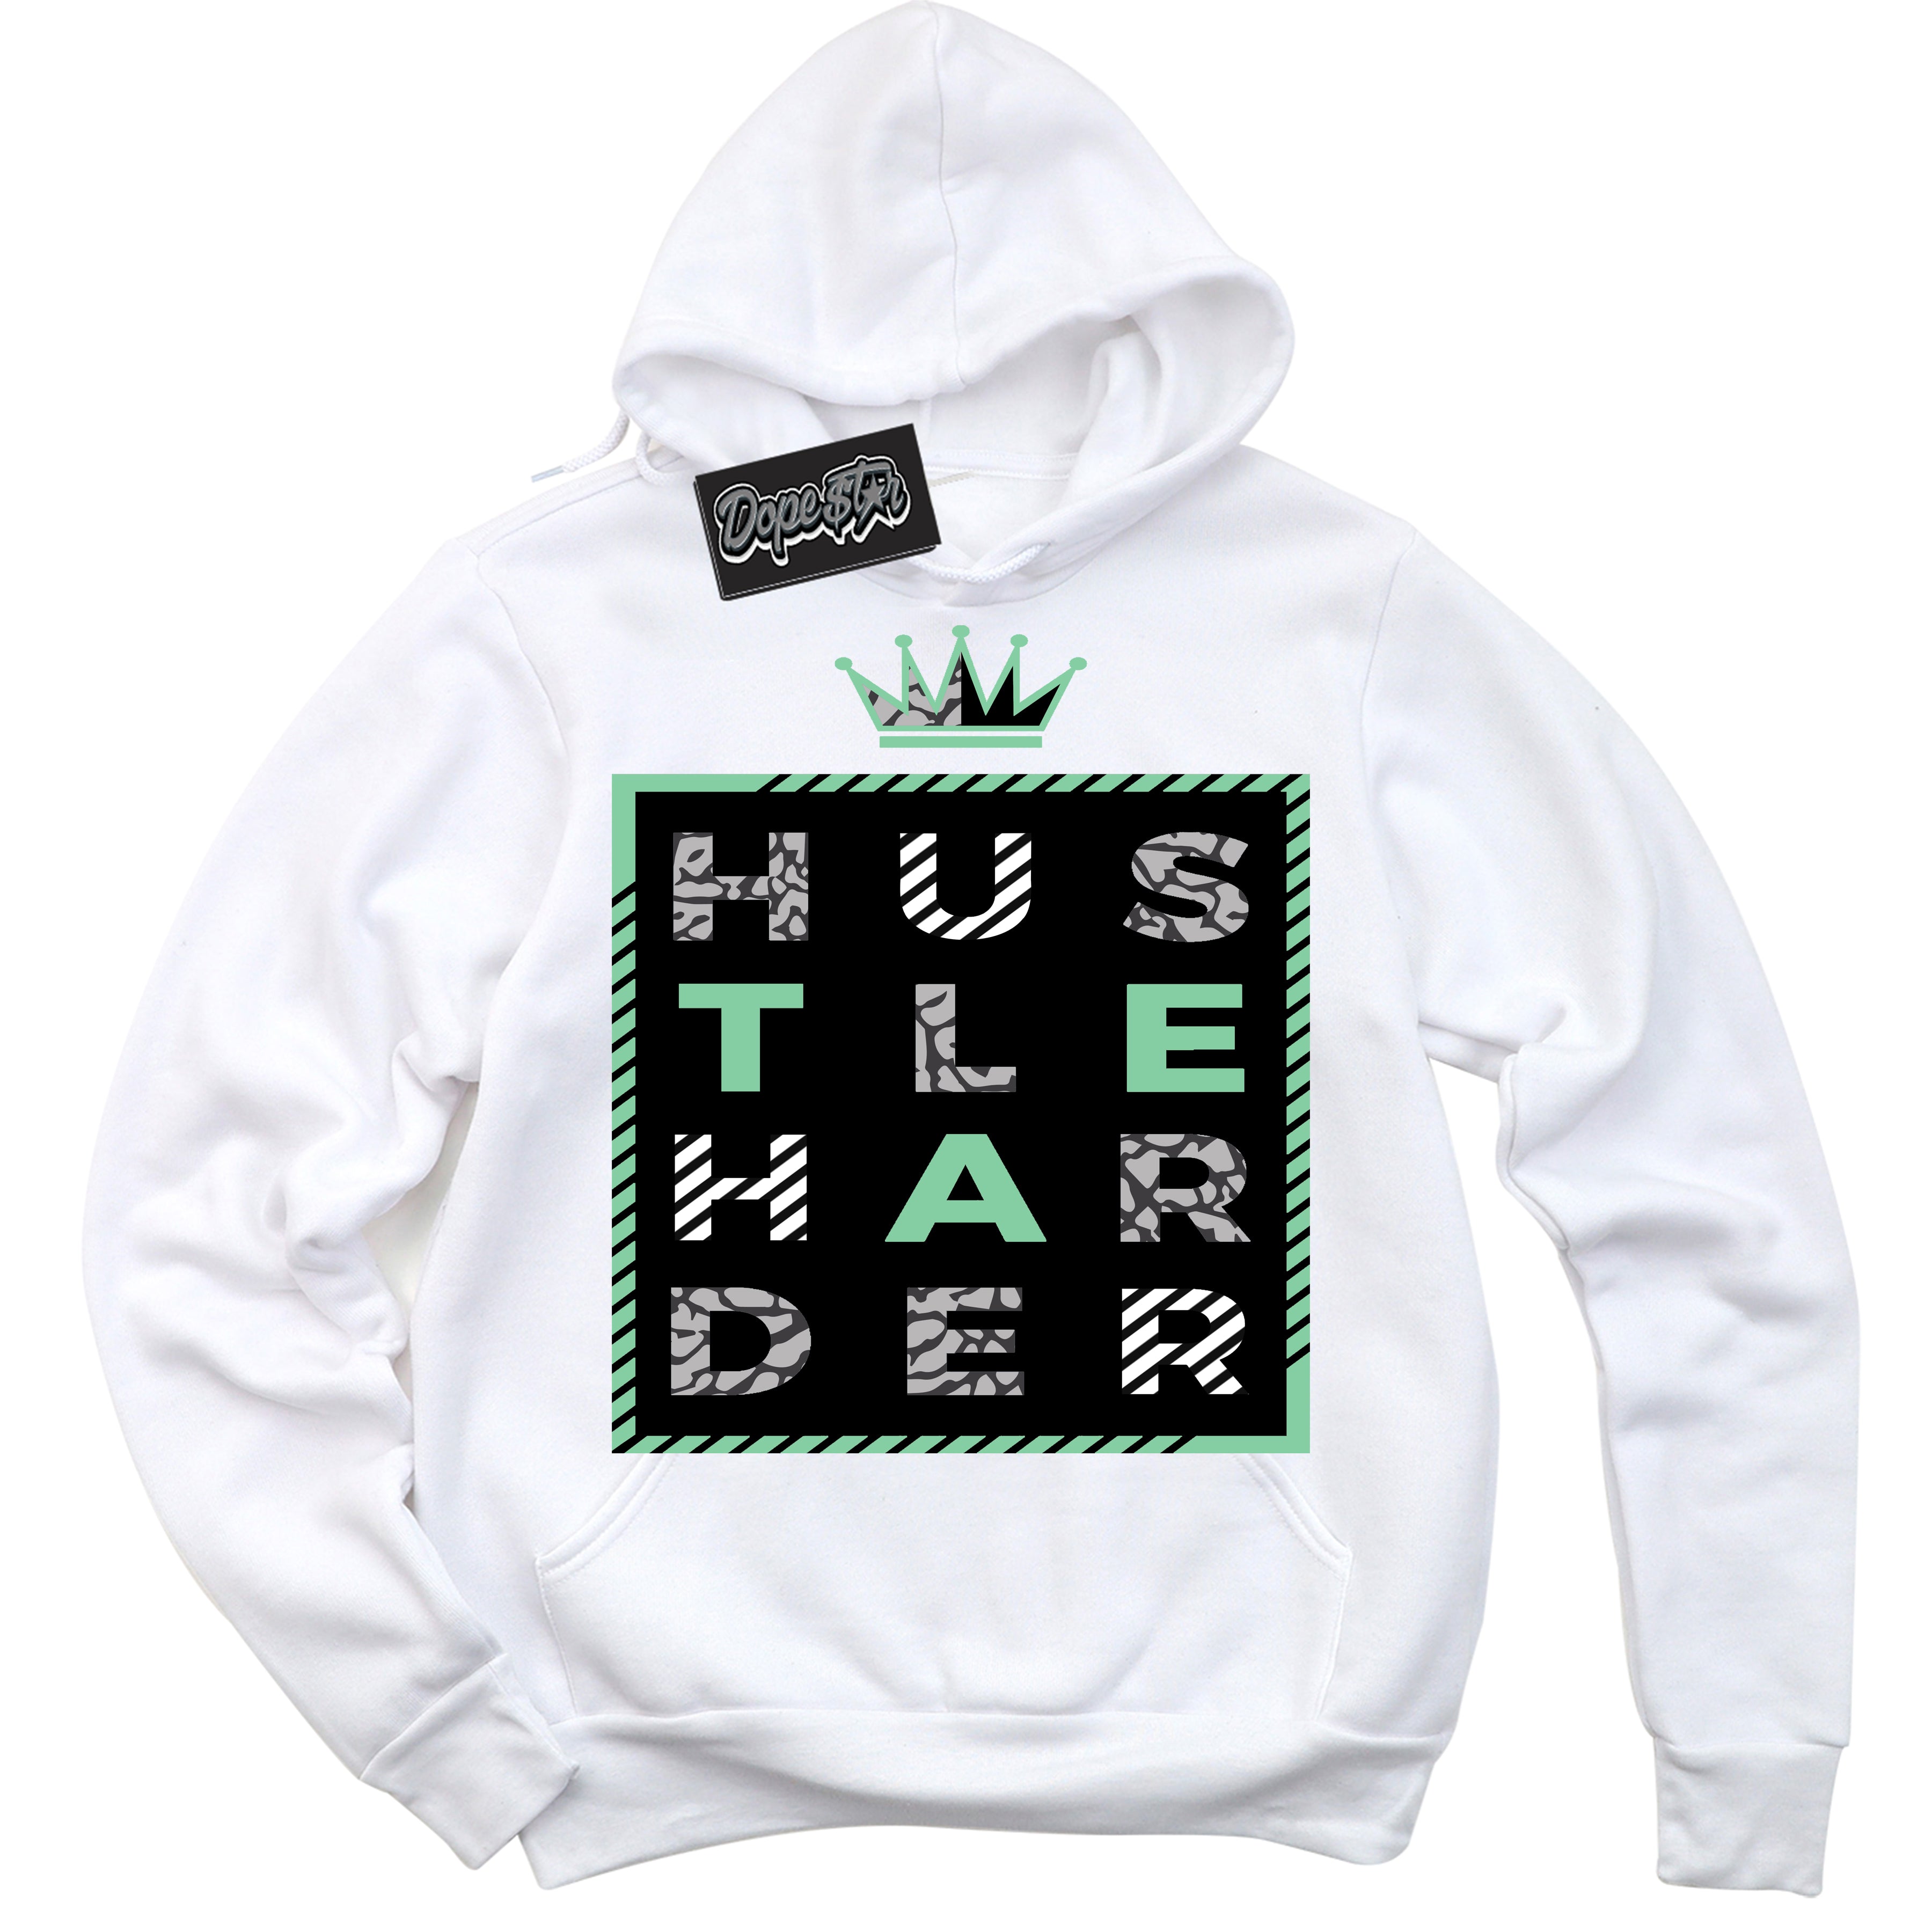 Cool White Graphic DopeStar Hoodie with “ Hustle Harder “ print, that perfectly matches Green Glow 3s sneakers